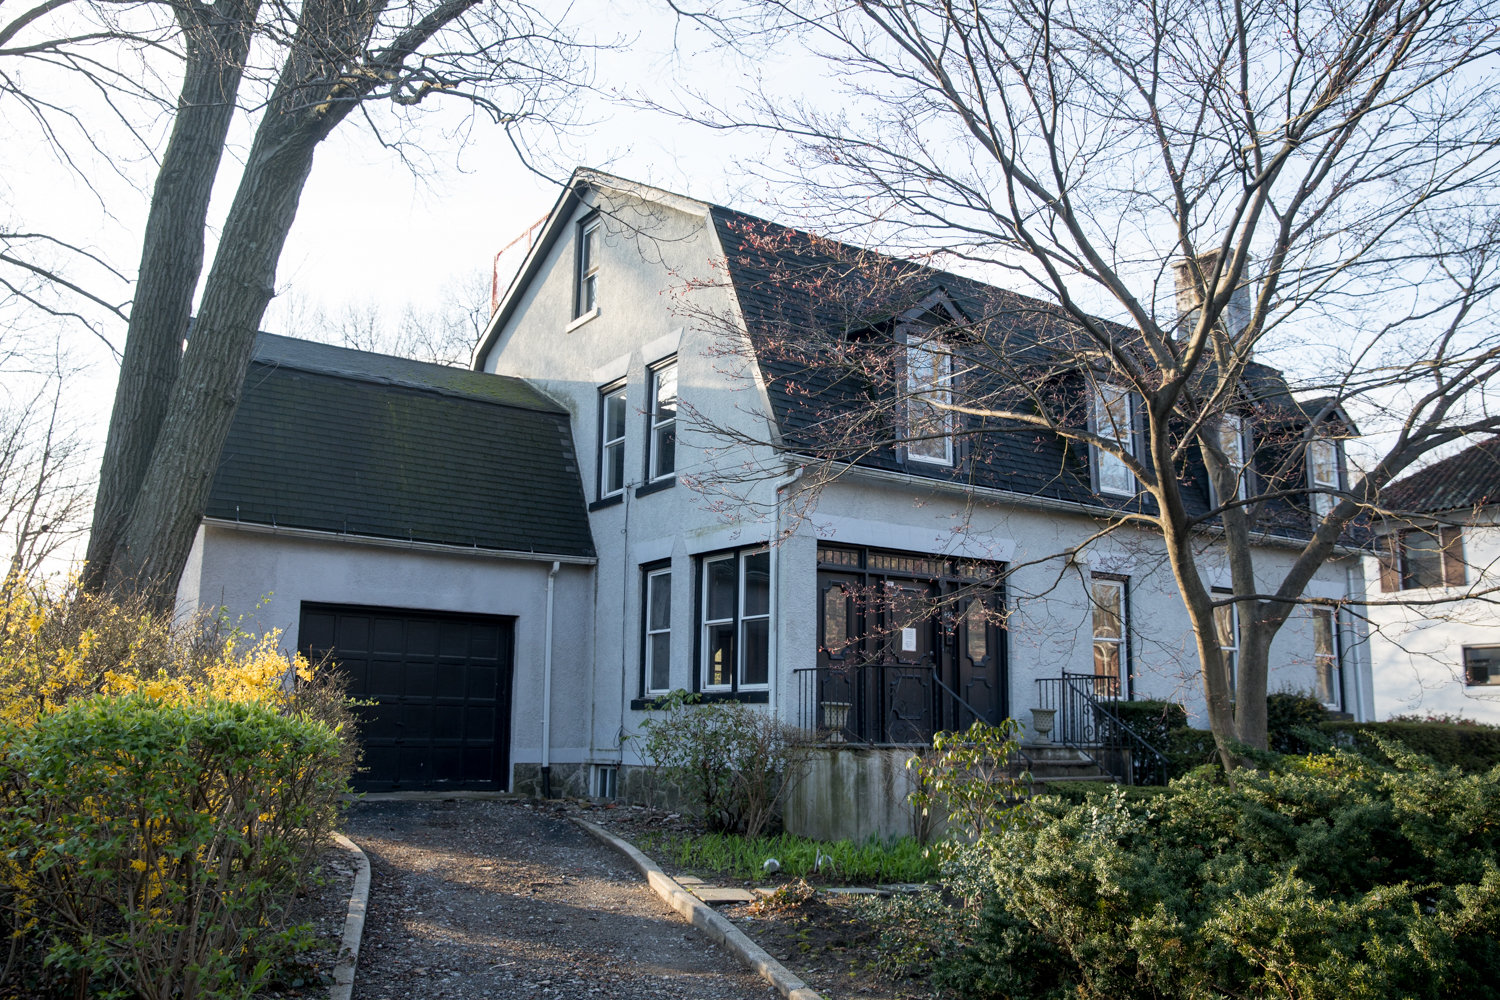 The Horace Mann School wants to renovate the property it owns at 4456 Tibbett Ave., in a way it says will help students better connect with colleges. The house is part of a wider swath.of property the school owns near its West 246th Street campus.